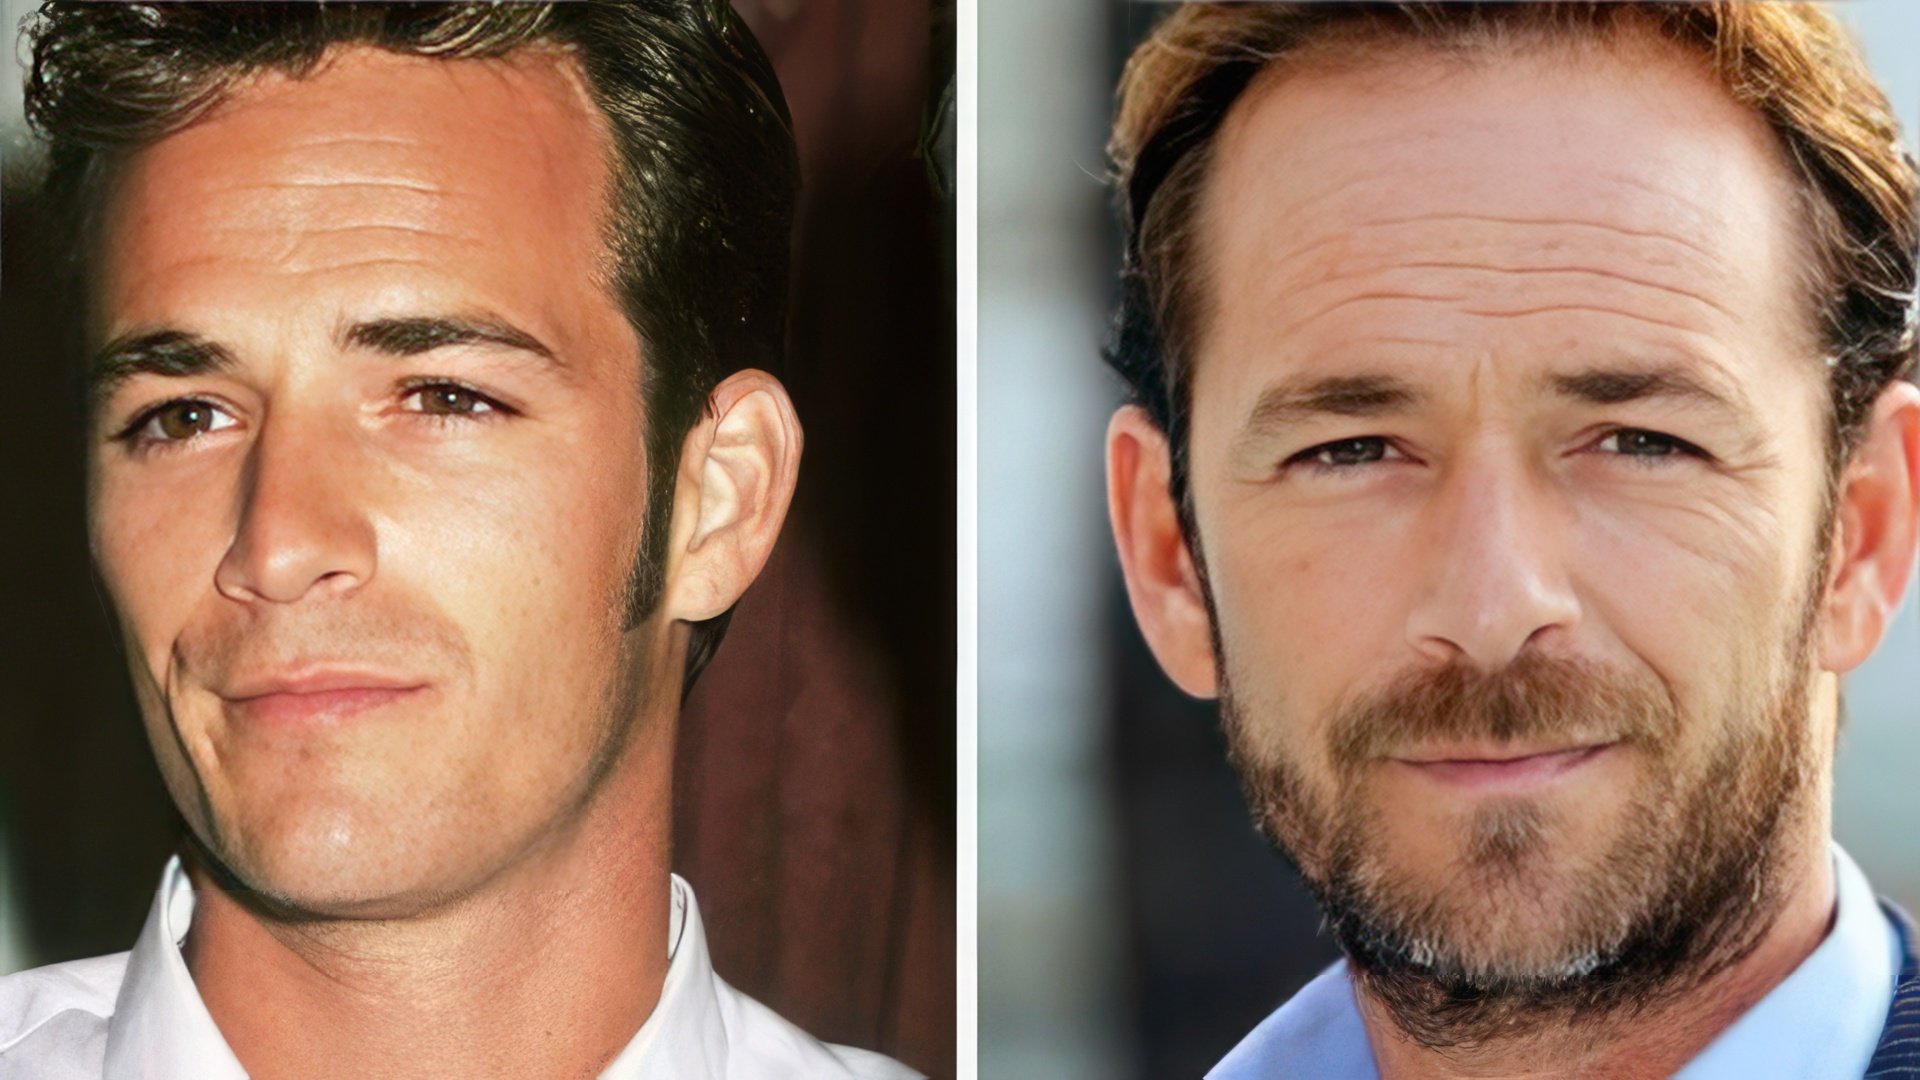 Luke Perry in his youth and now